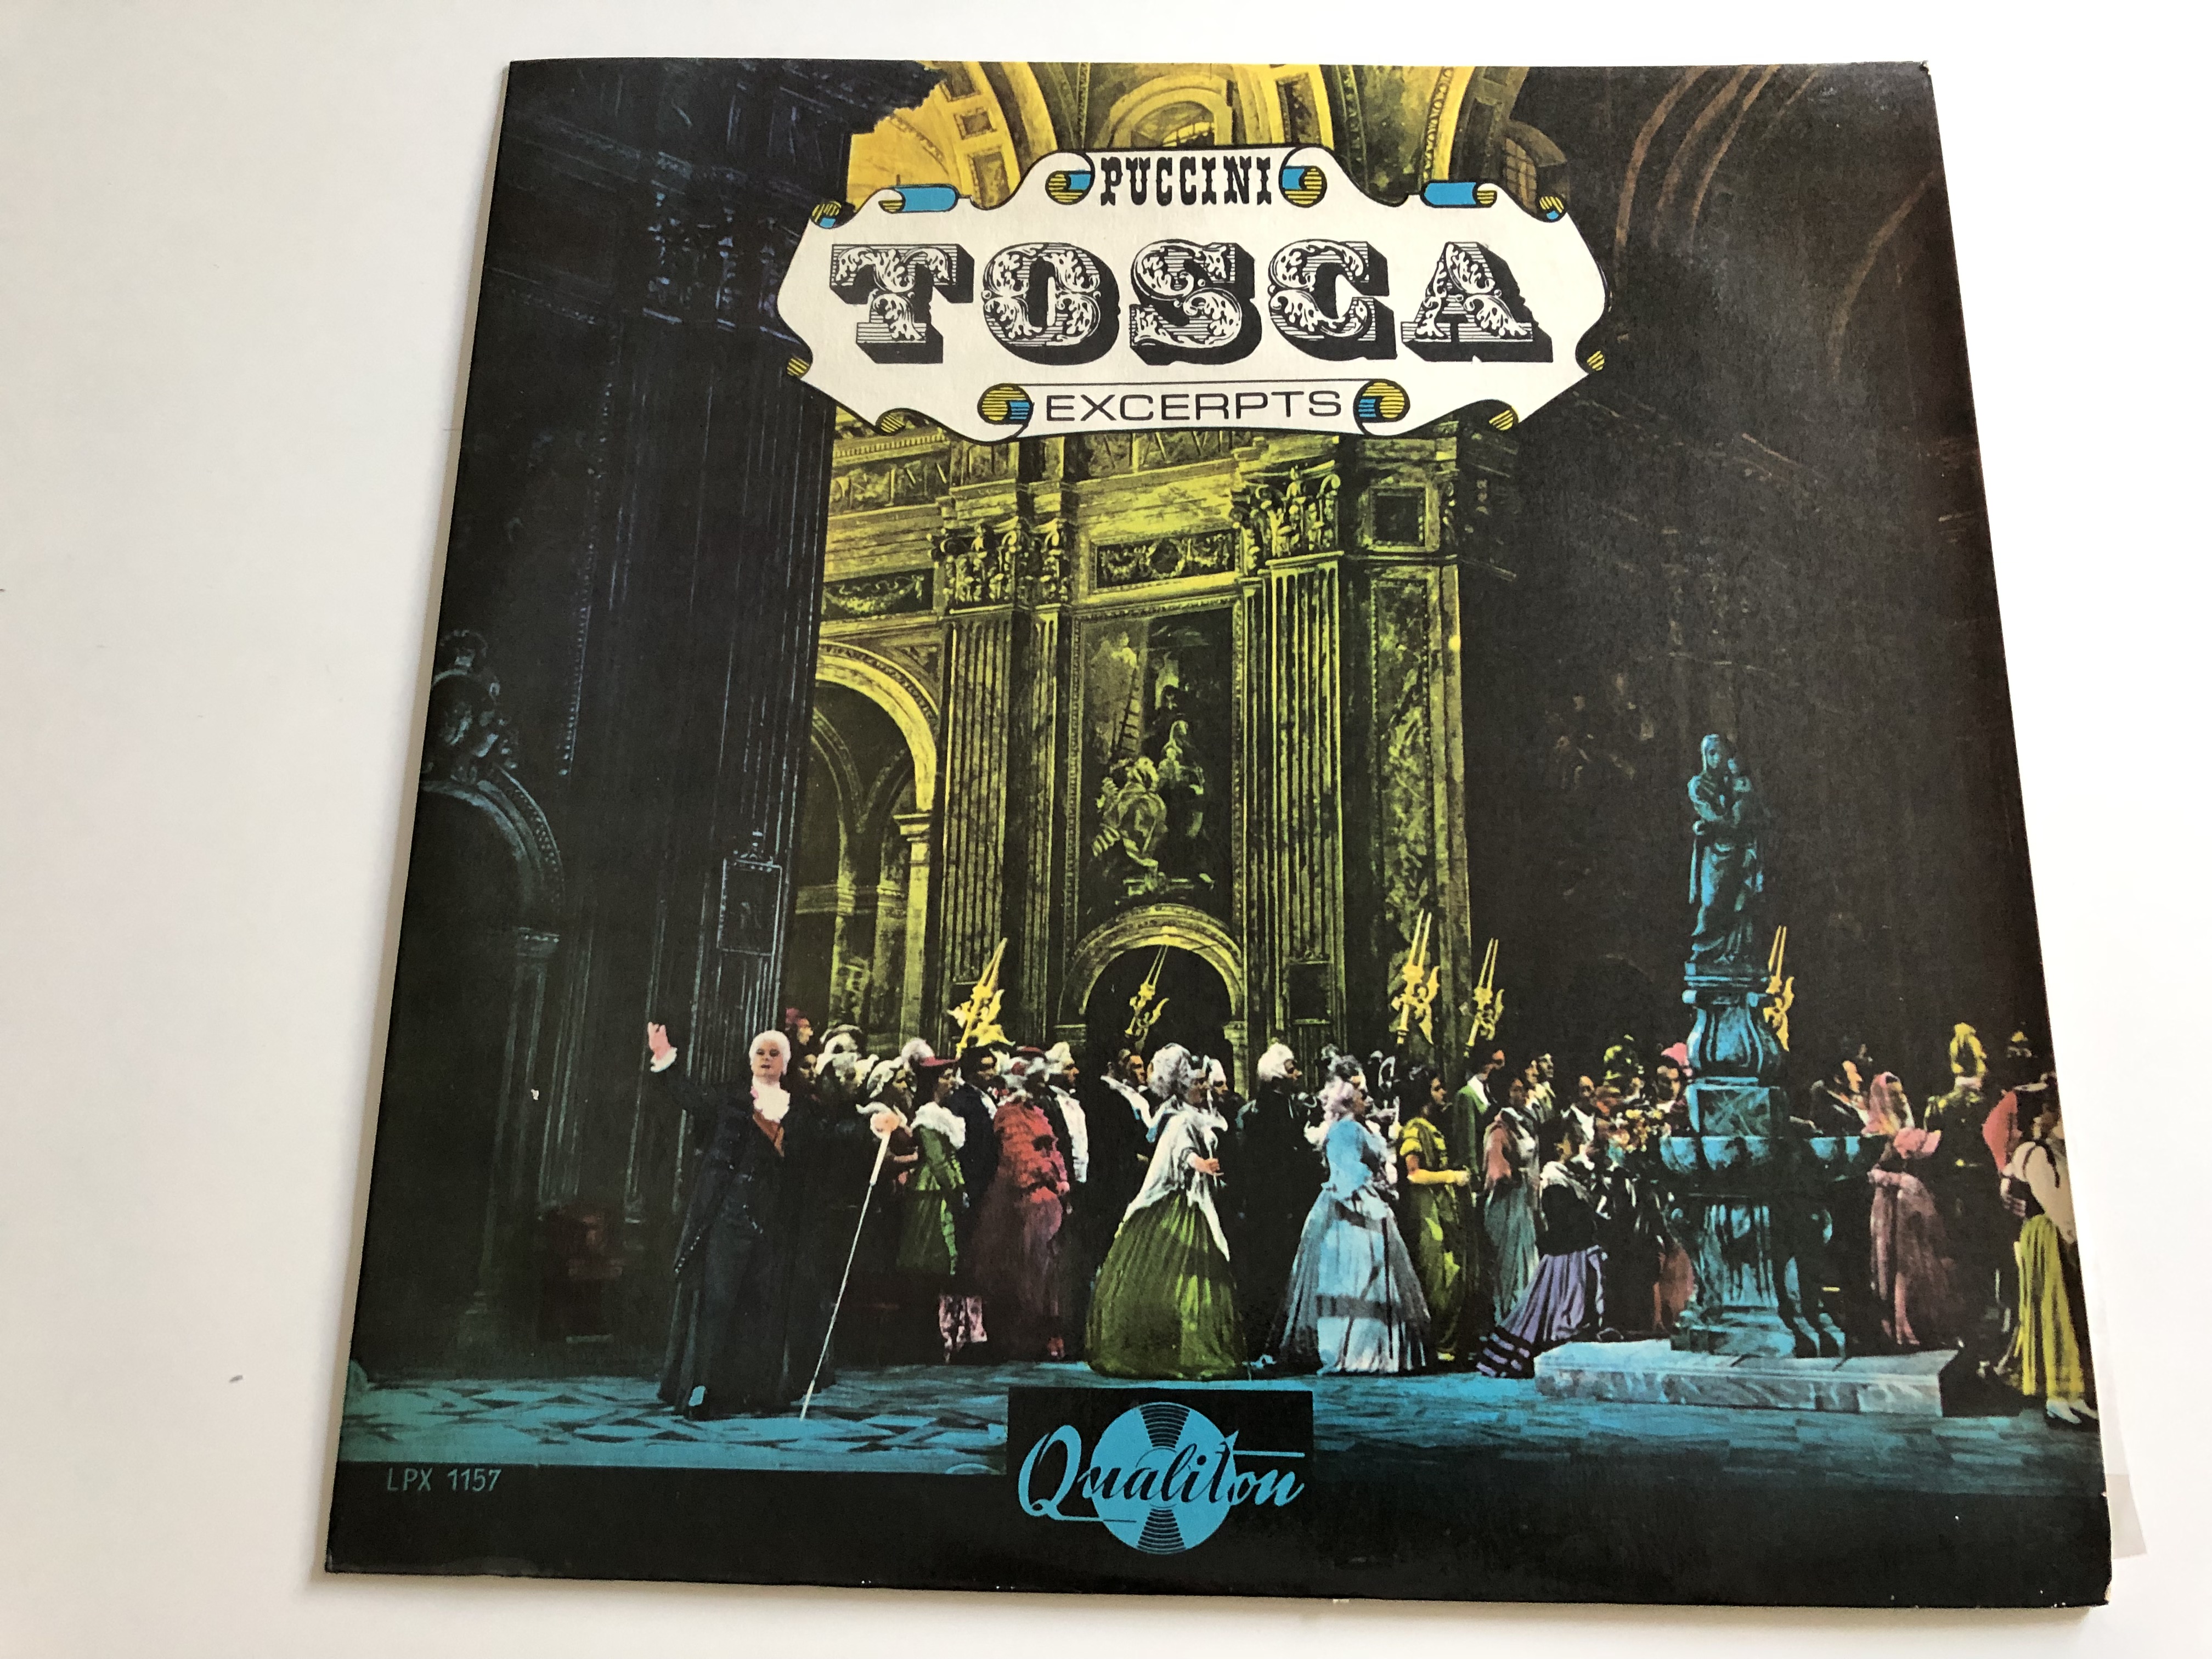 puccini-tosca-excerpts-conducted-mikl-s-erd-lyi-chorus-of-the-hungarian-state-opera-house-qualiton-lp-lpx-1157-1-.jpg